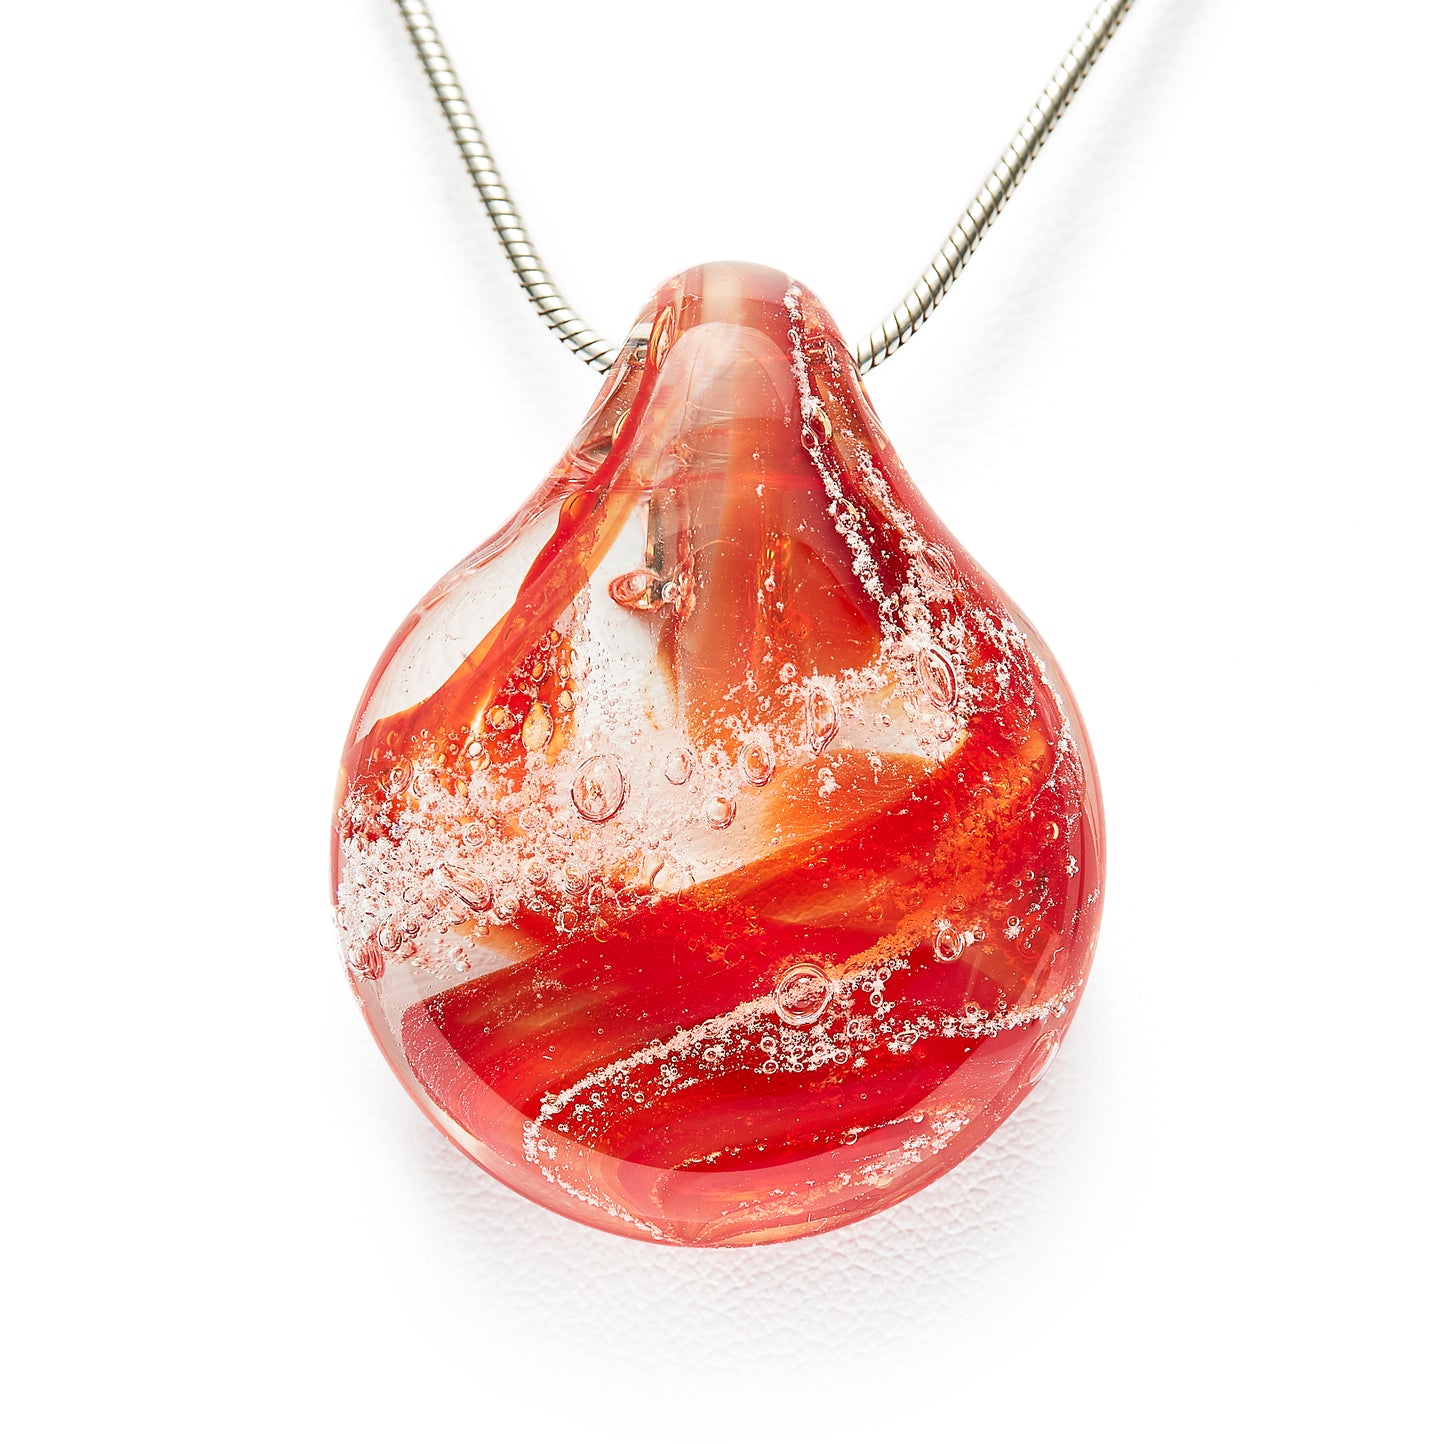 Memorial glass art pendant with cremation ash. Ruby red glass.